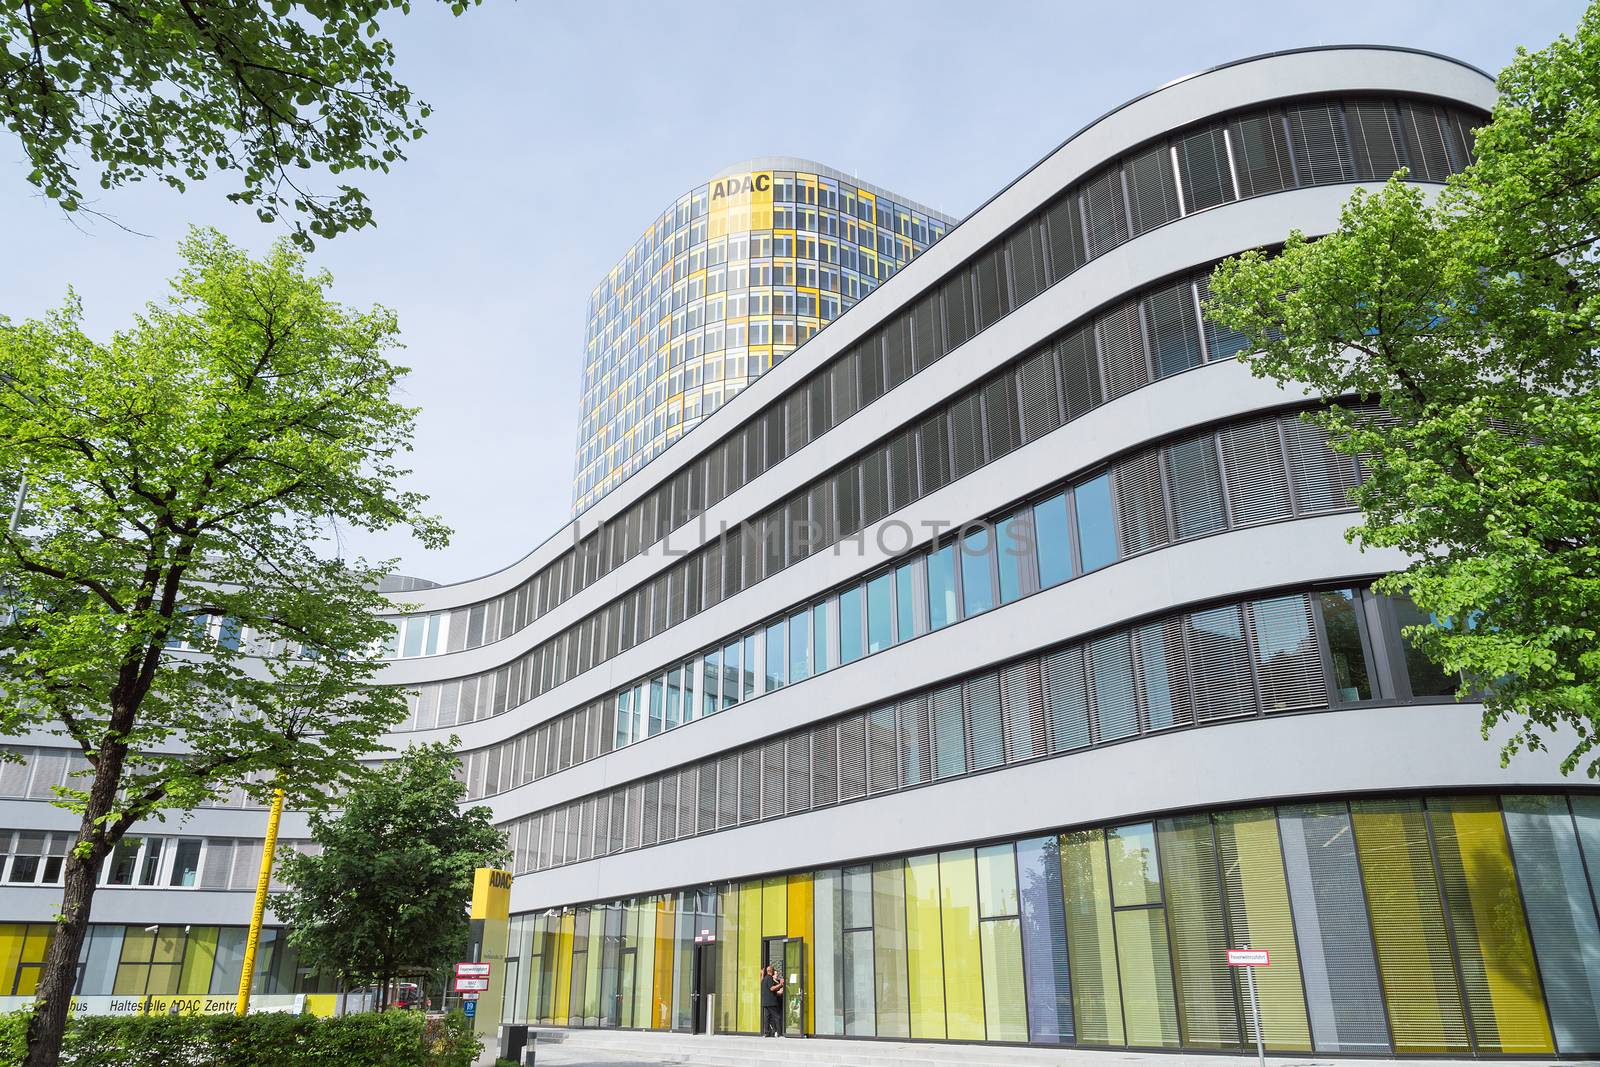 Munich, Germany - May 12, 2015: The new ADAC Headquarters accommodates 2,400 employees who were previously spread across six different locations in Munich.  The 18-storey office tower rises above a 5-storey base. The new building includes conference facilities and a training center, a staff restaurant, a print shop and office space.